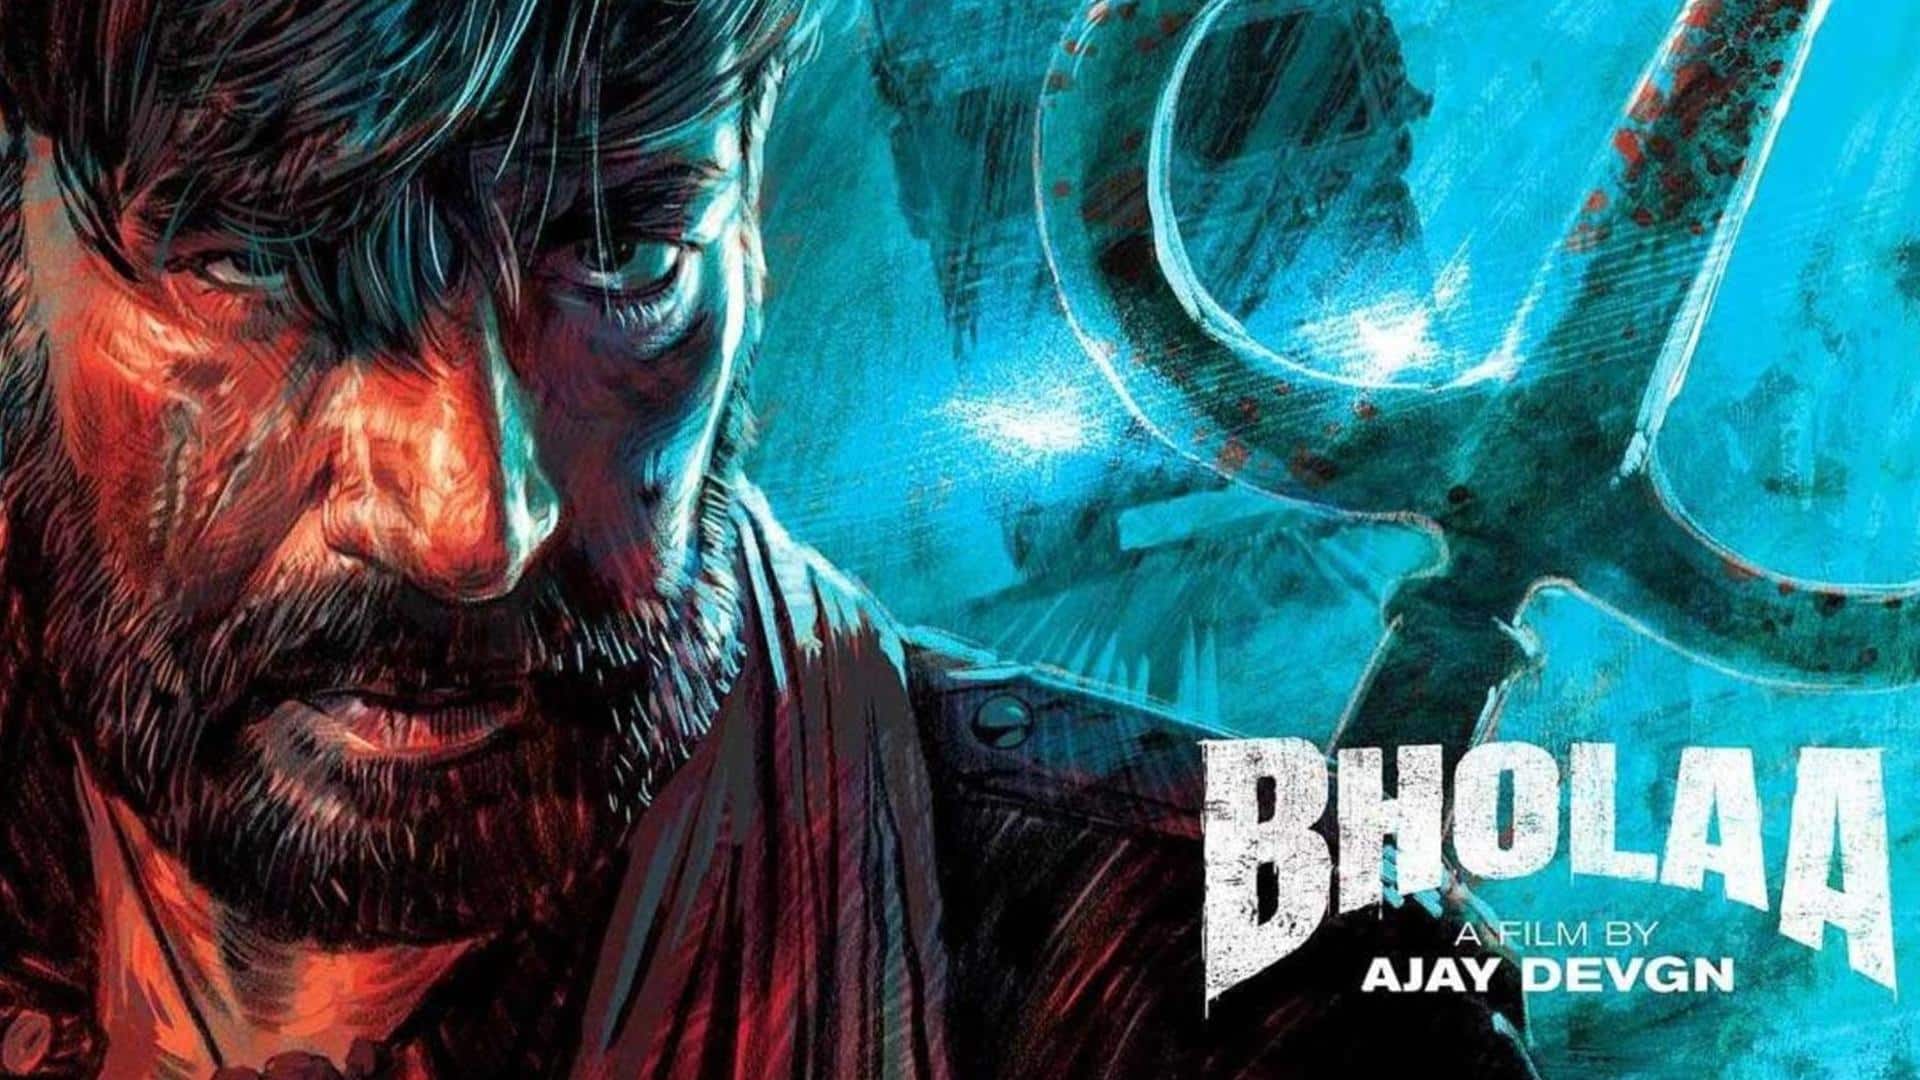 Box office: 'Bholaa' registers a steady but underwhelming start